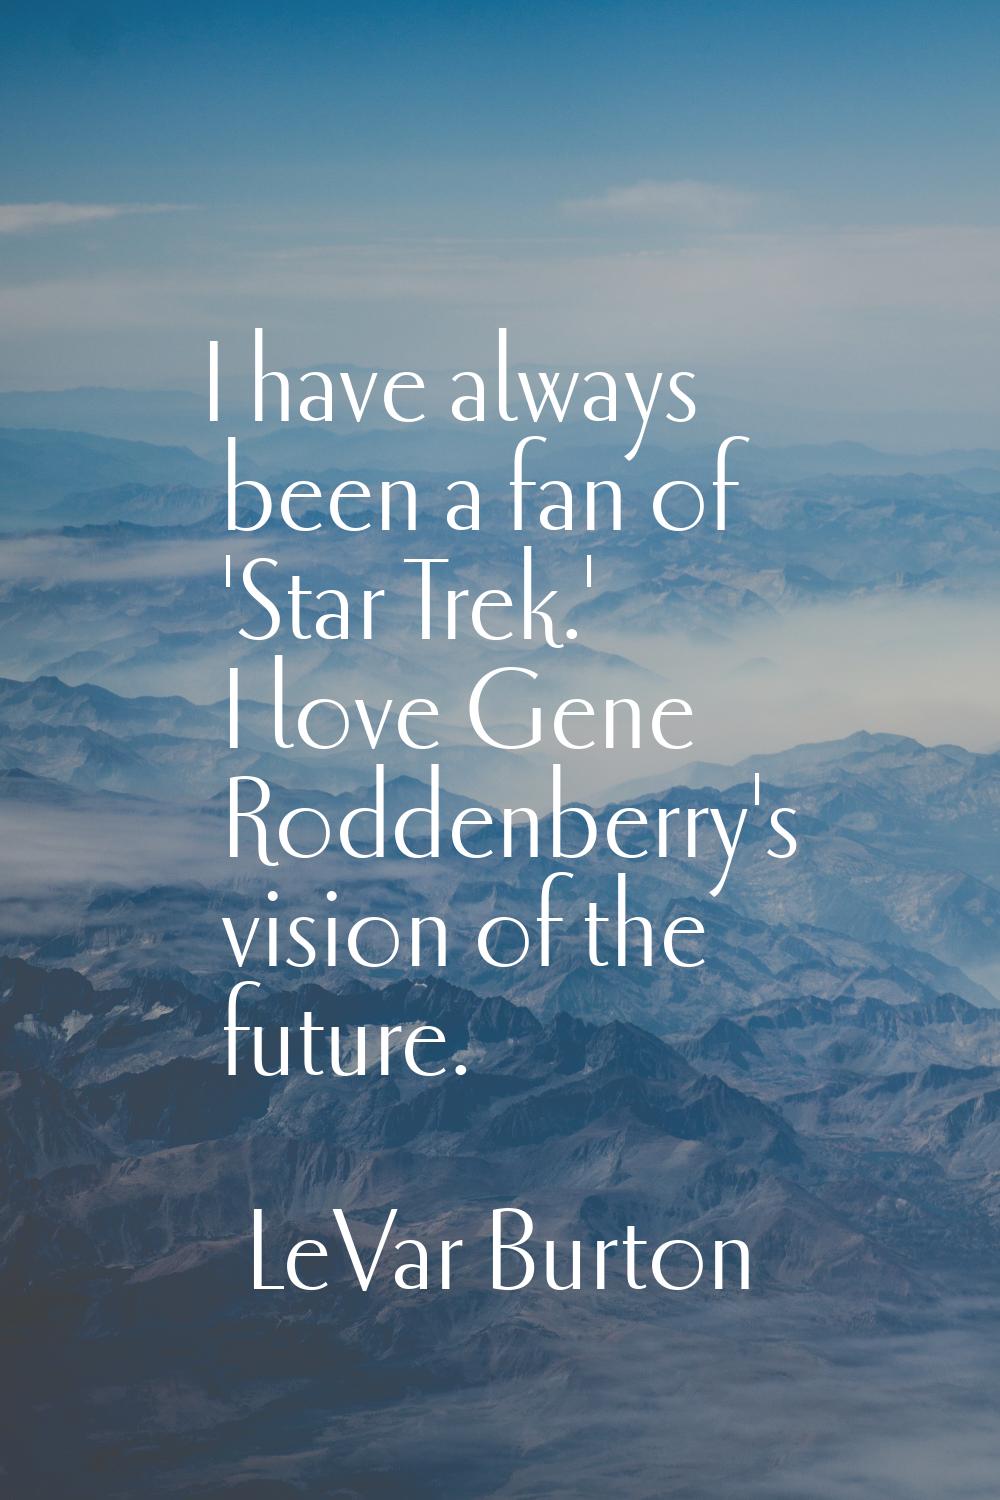 I have always been a fan of 'Star Trek.' I love Gene Roddenberry's vision of the future.